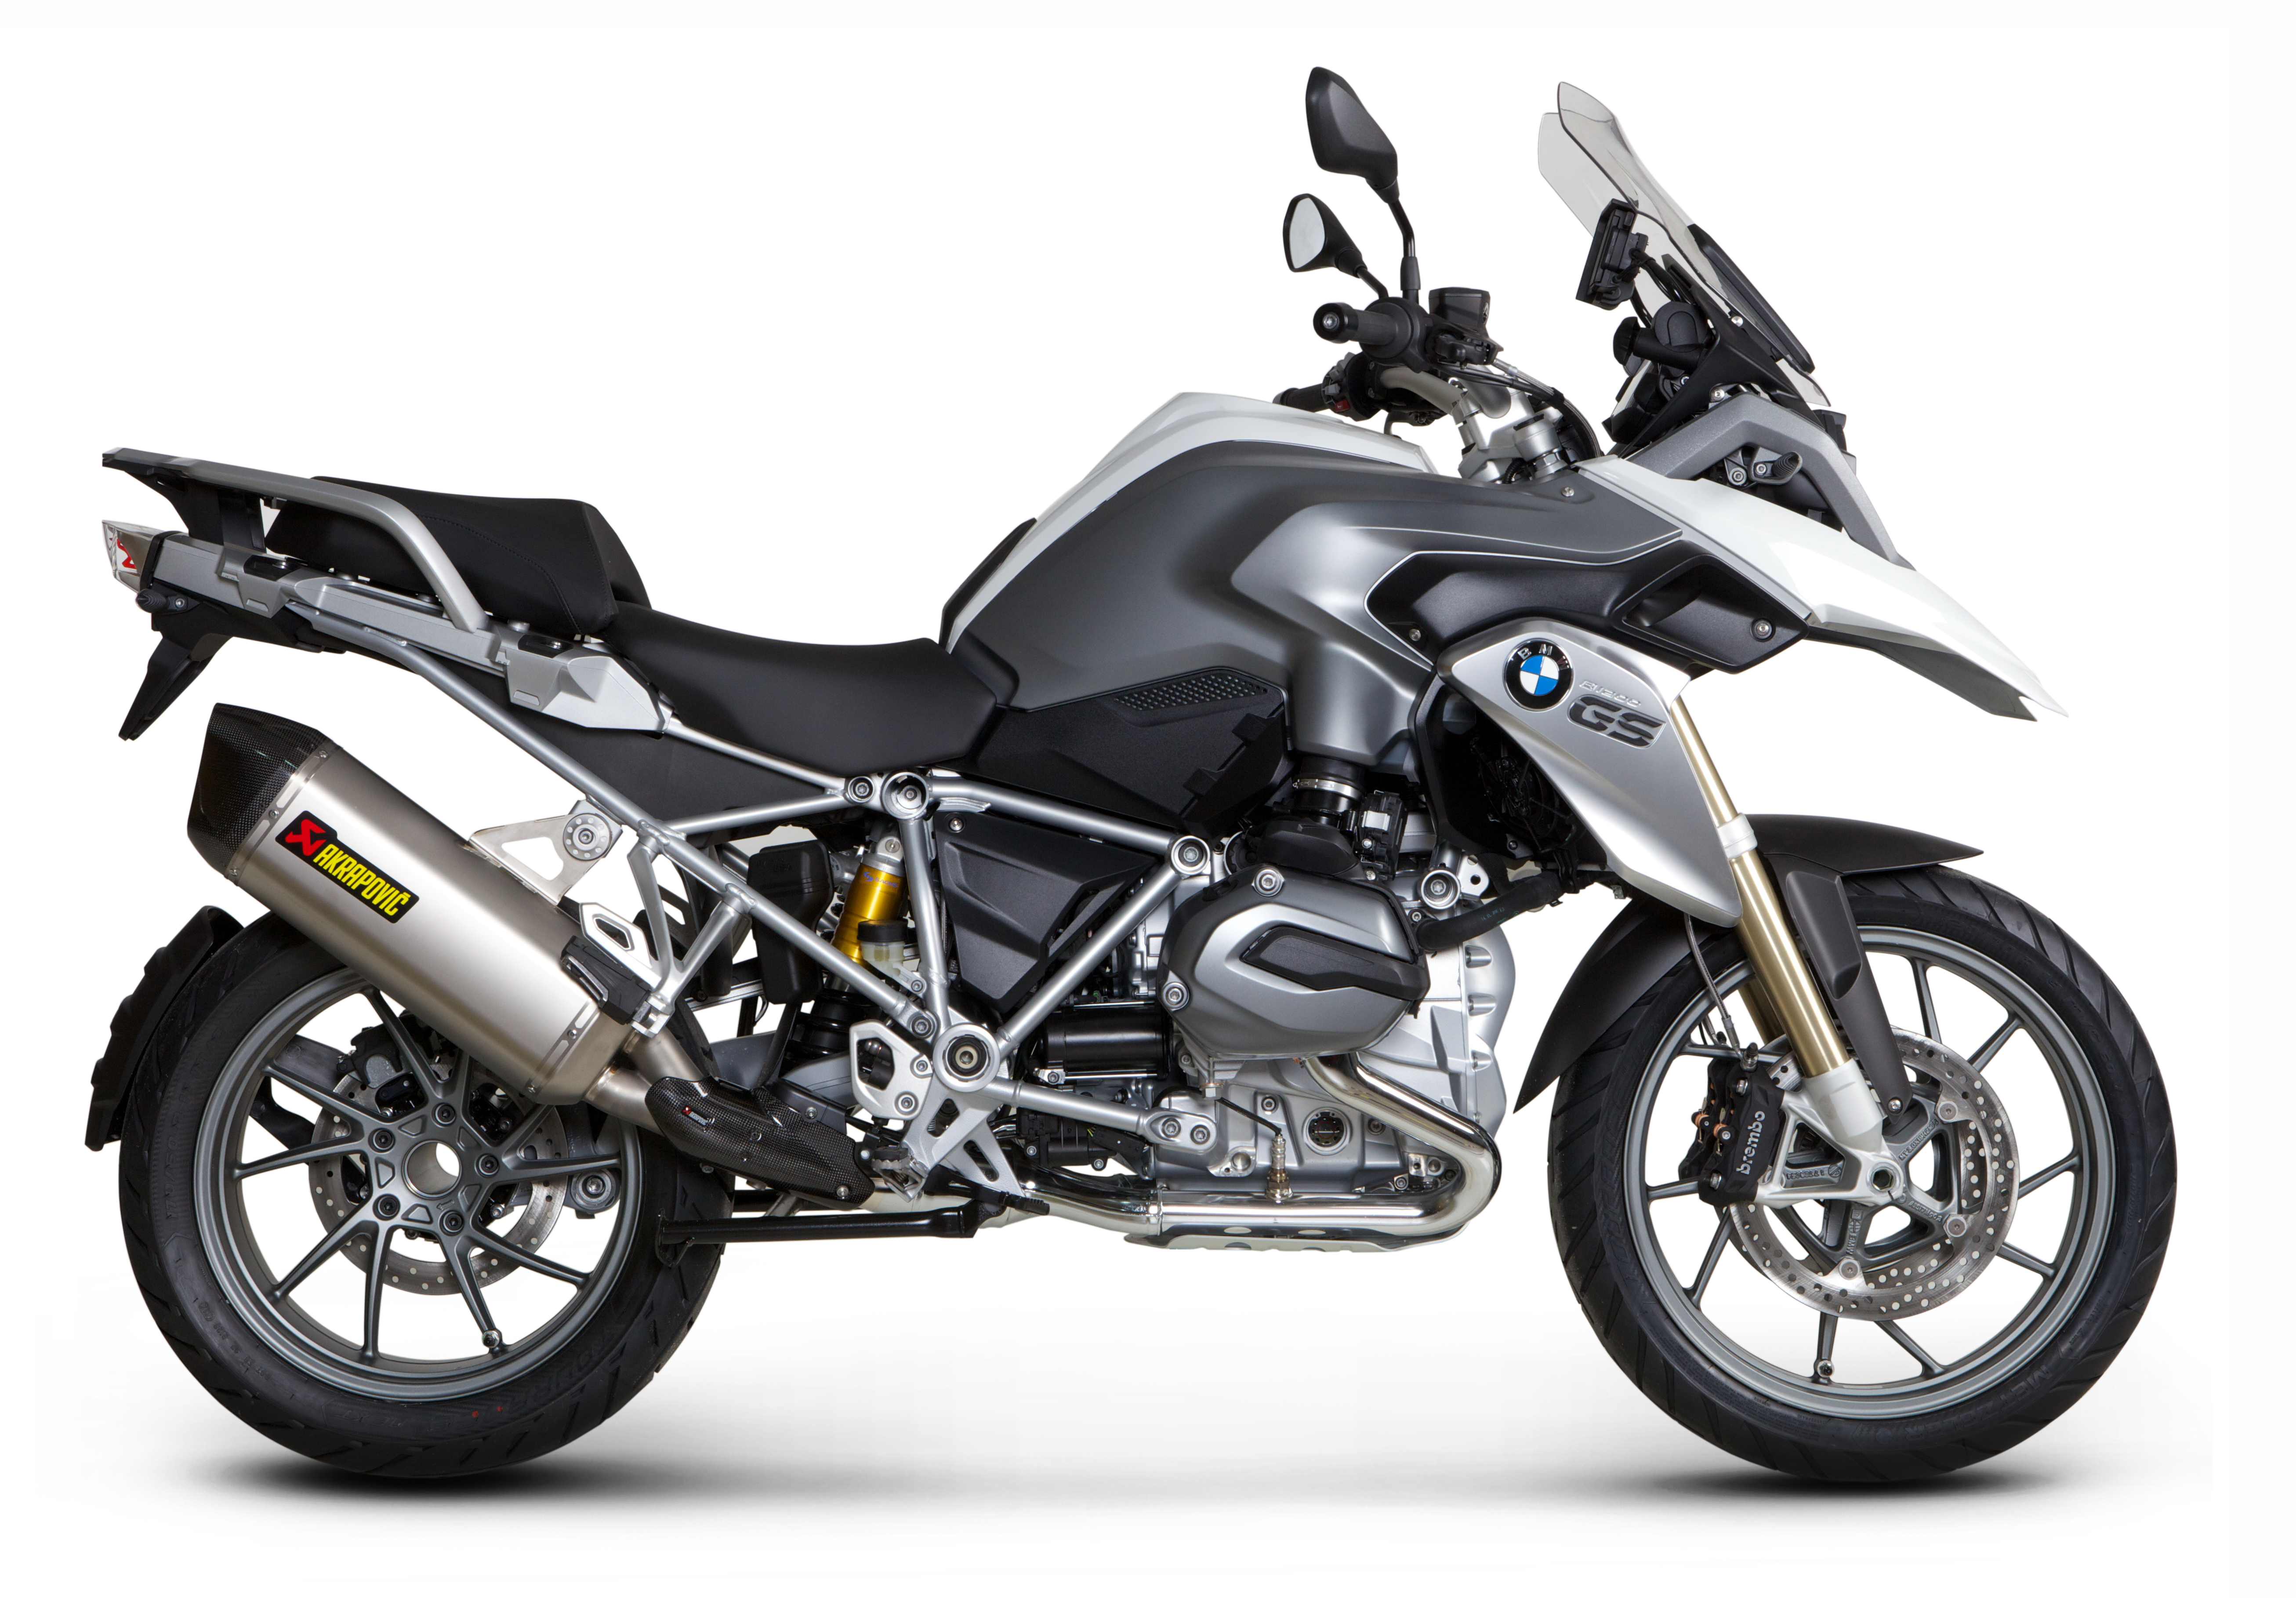 New: Akrapovic's slip on exhaust for the 2013 1200GS